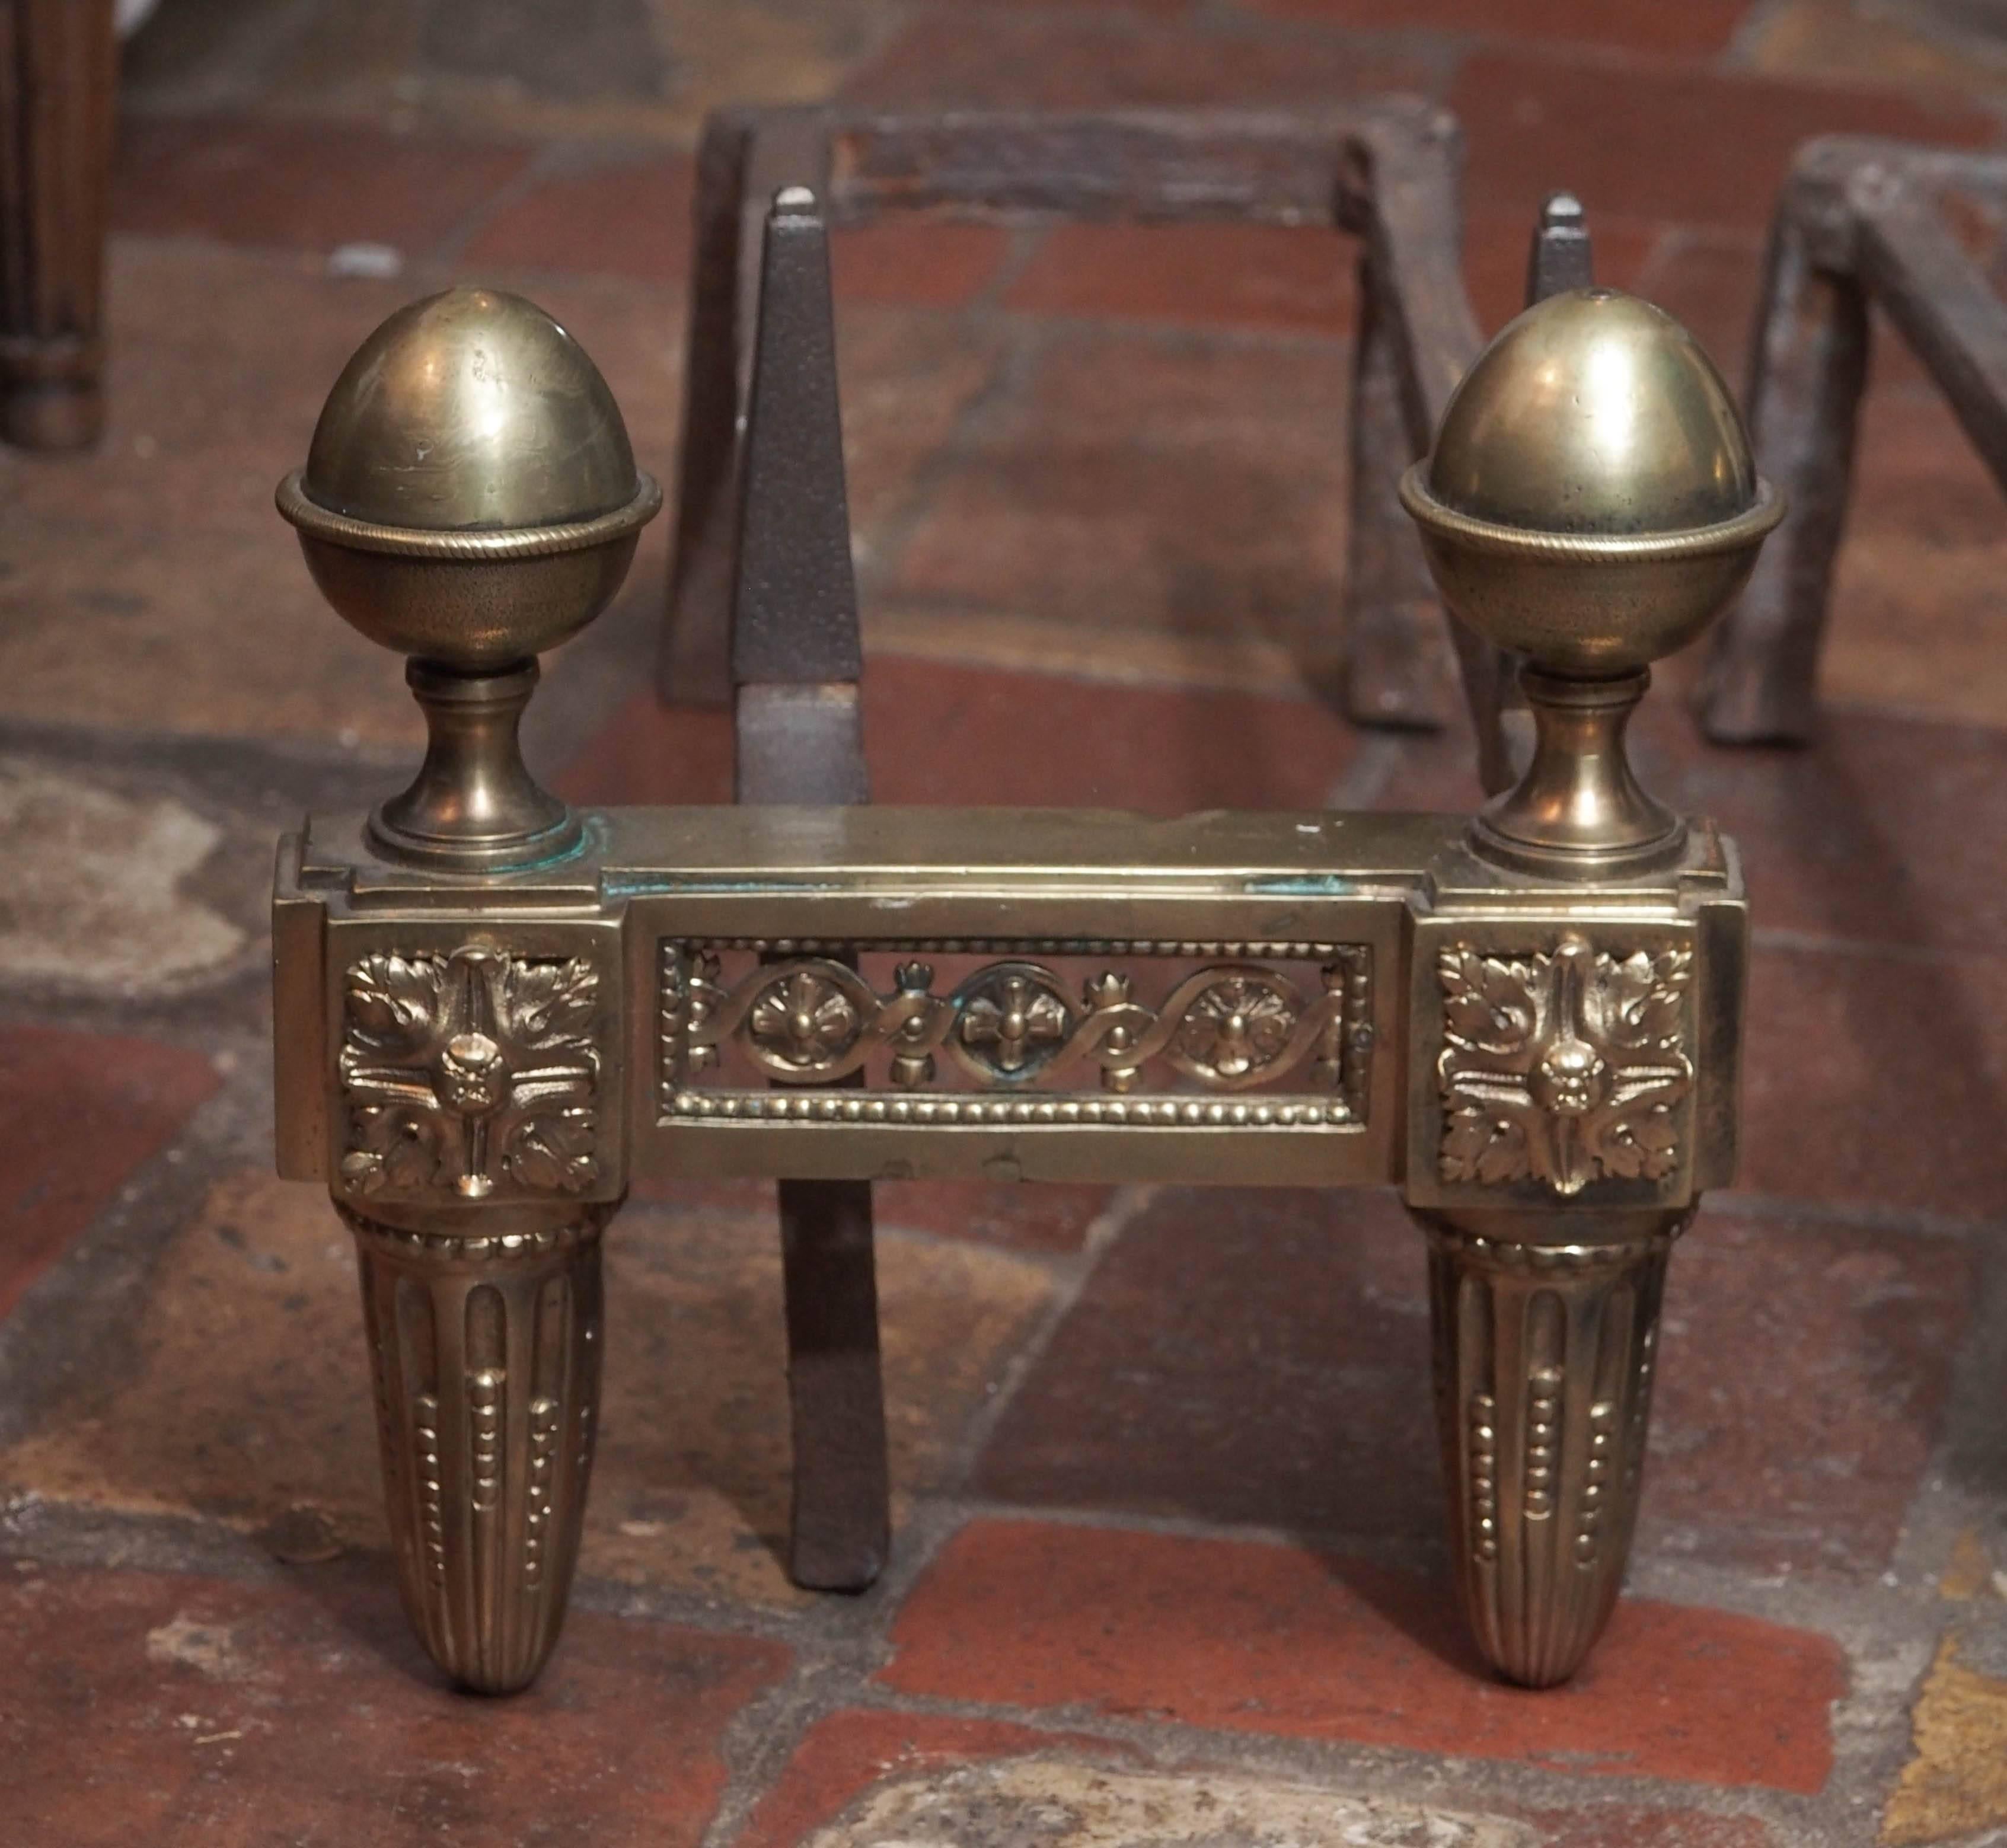 Rare pair of 18th century hand-forged French Louis XVI style bronze andirons, circa 1790.